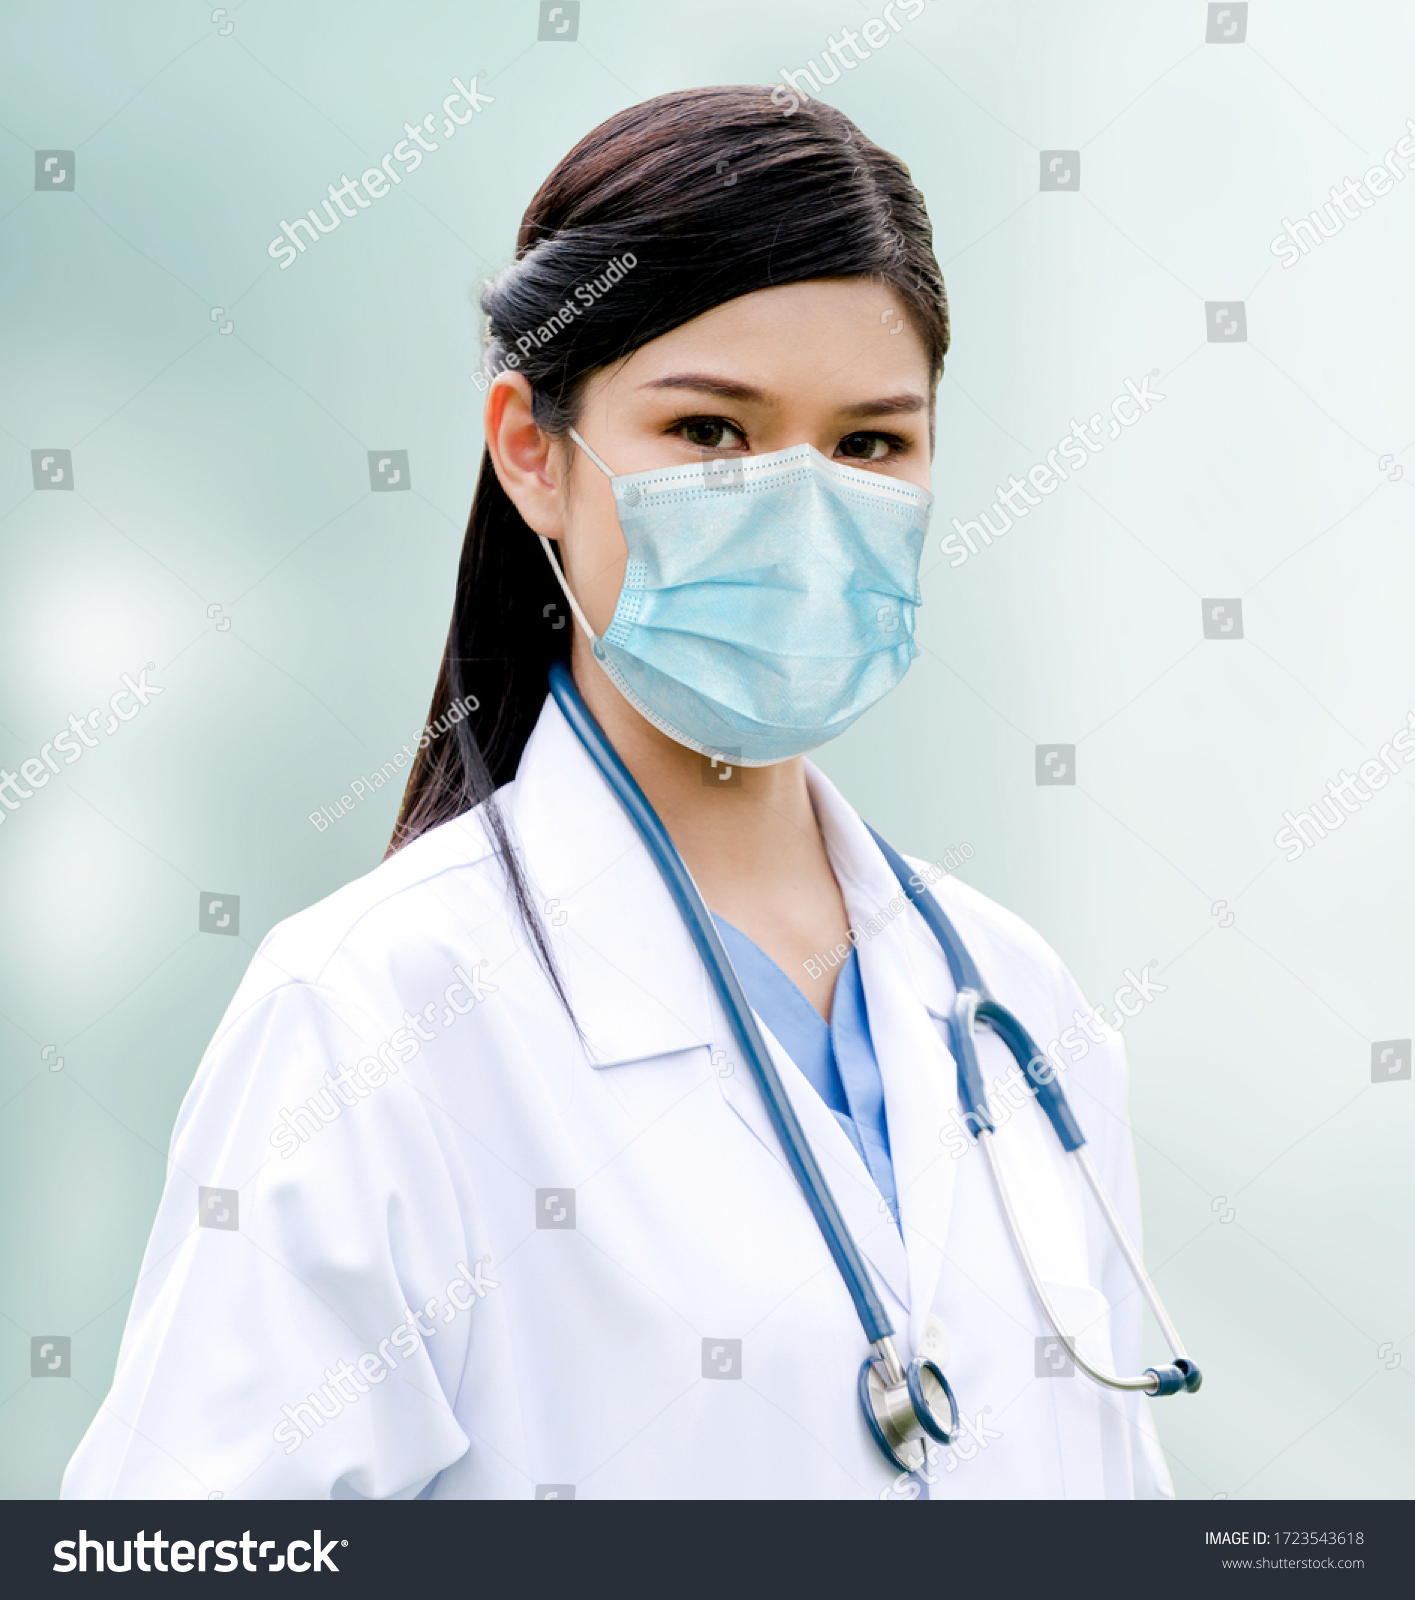 Doctor wear face mask in hospital protect from coronavirus disease or COVID-19. Medical staff are high risk people to receive infection from coronavirus disease or COVID-19. #1723543618